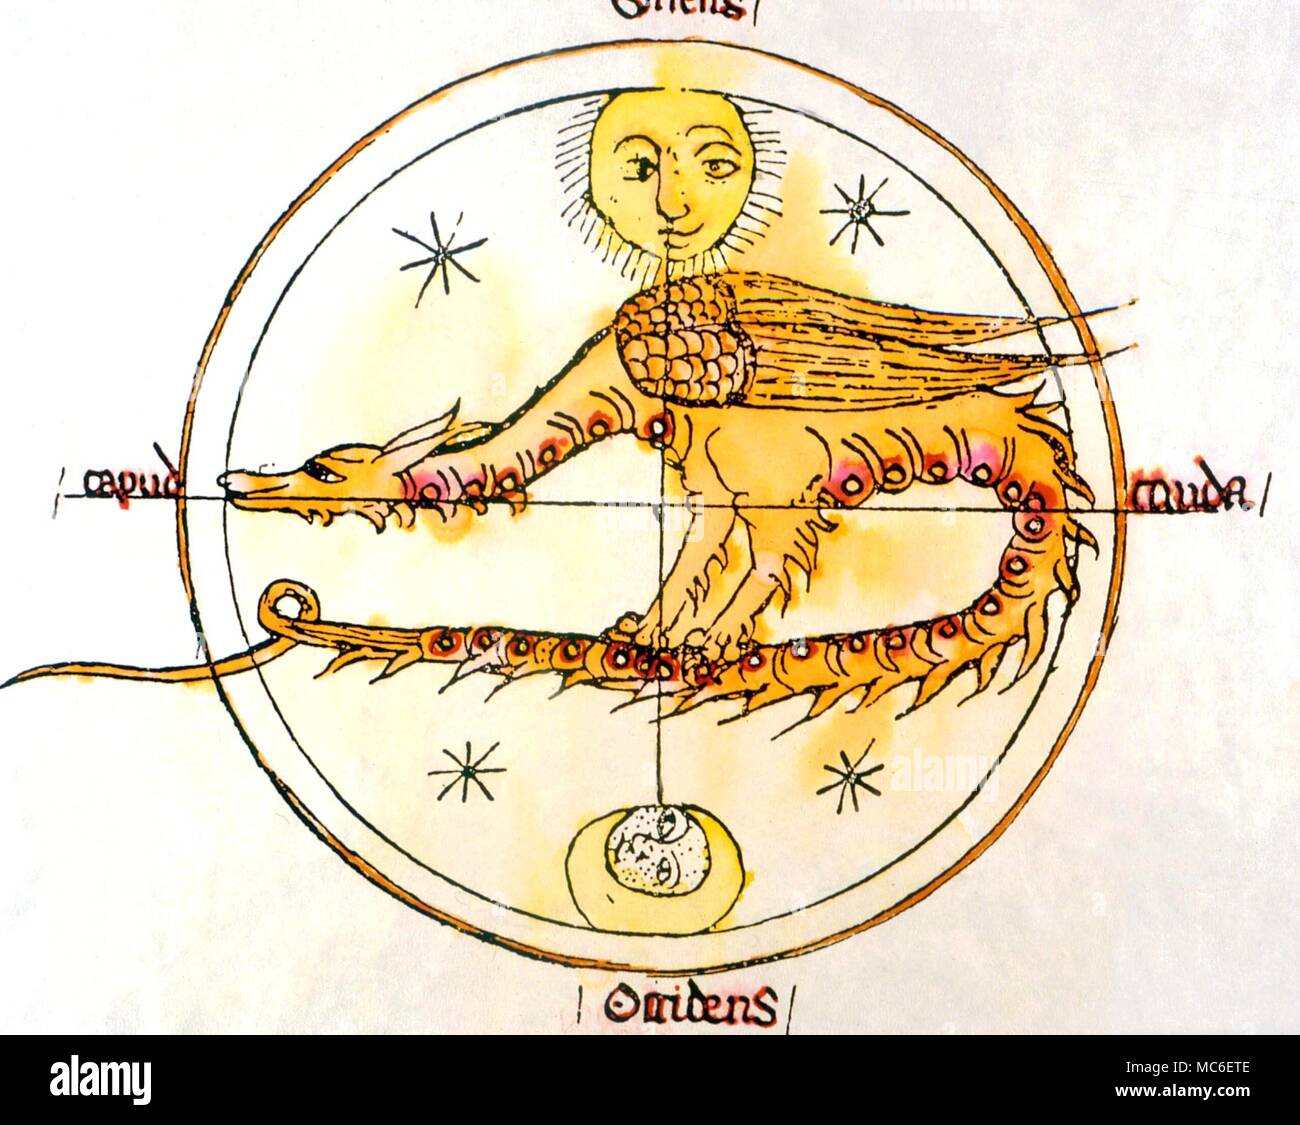 Lunar dragon (the ancient Atalia) representing the head (Caput) and tail (Cauda) of the lunar nodes. After a 13th century manuscript by Michael Scot Stock Photo